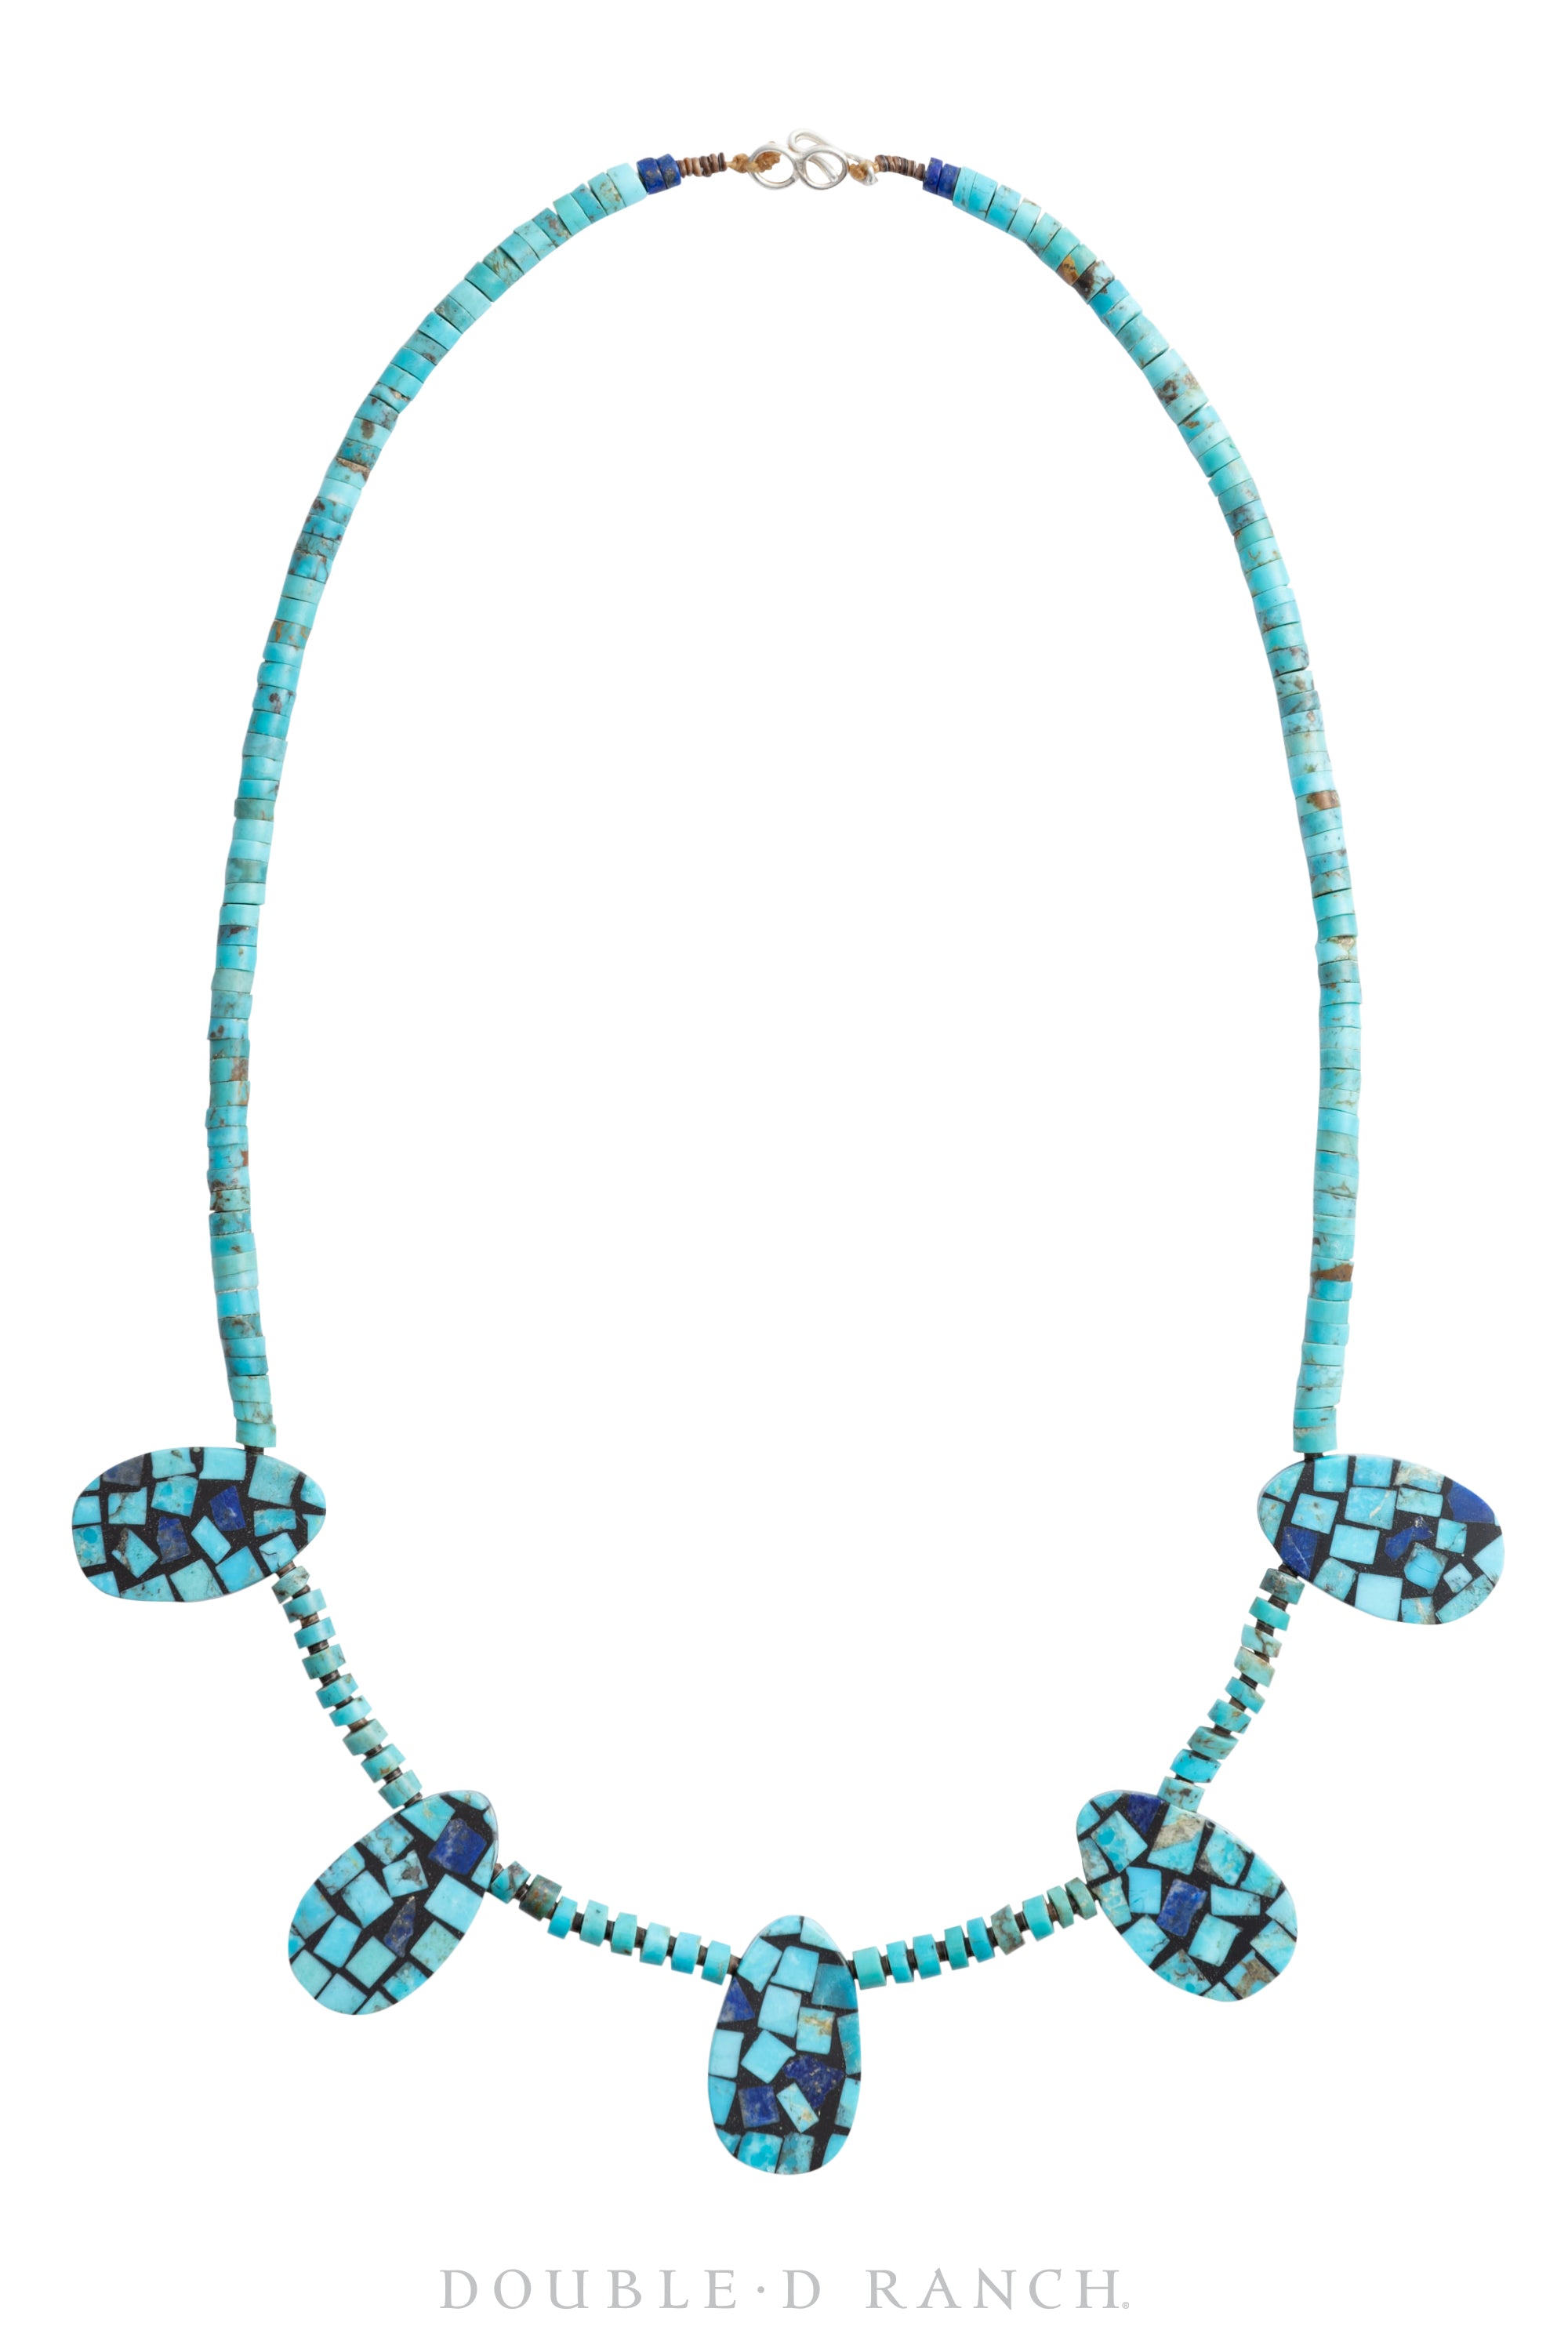 Necklace, Inlay, Turquoise & Lapis, Artisan, Contemporary, 1716